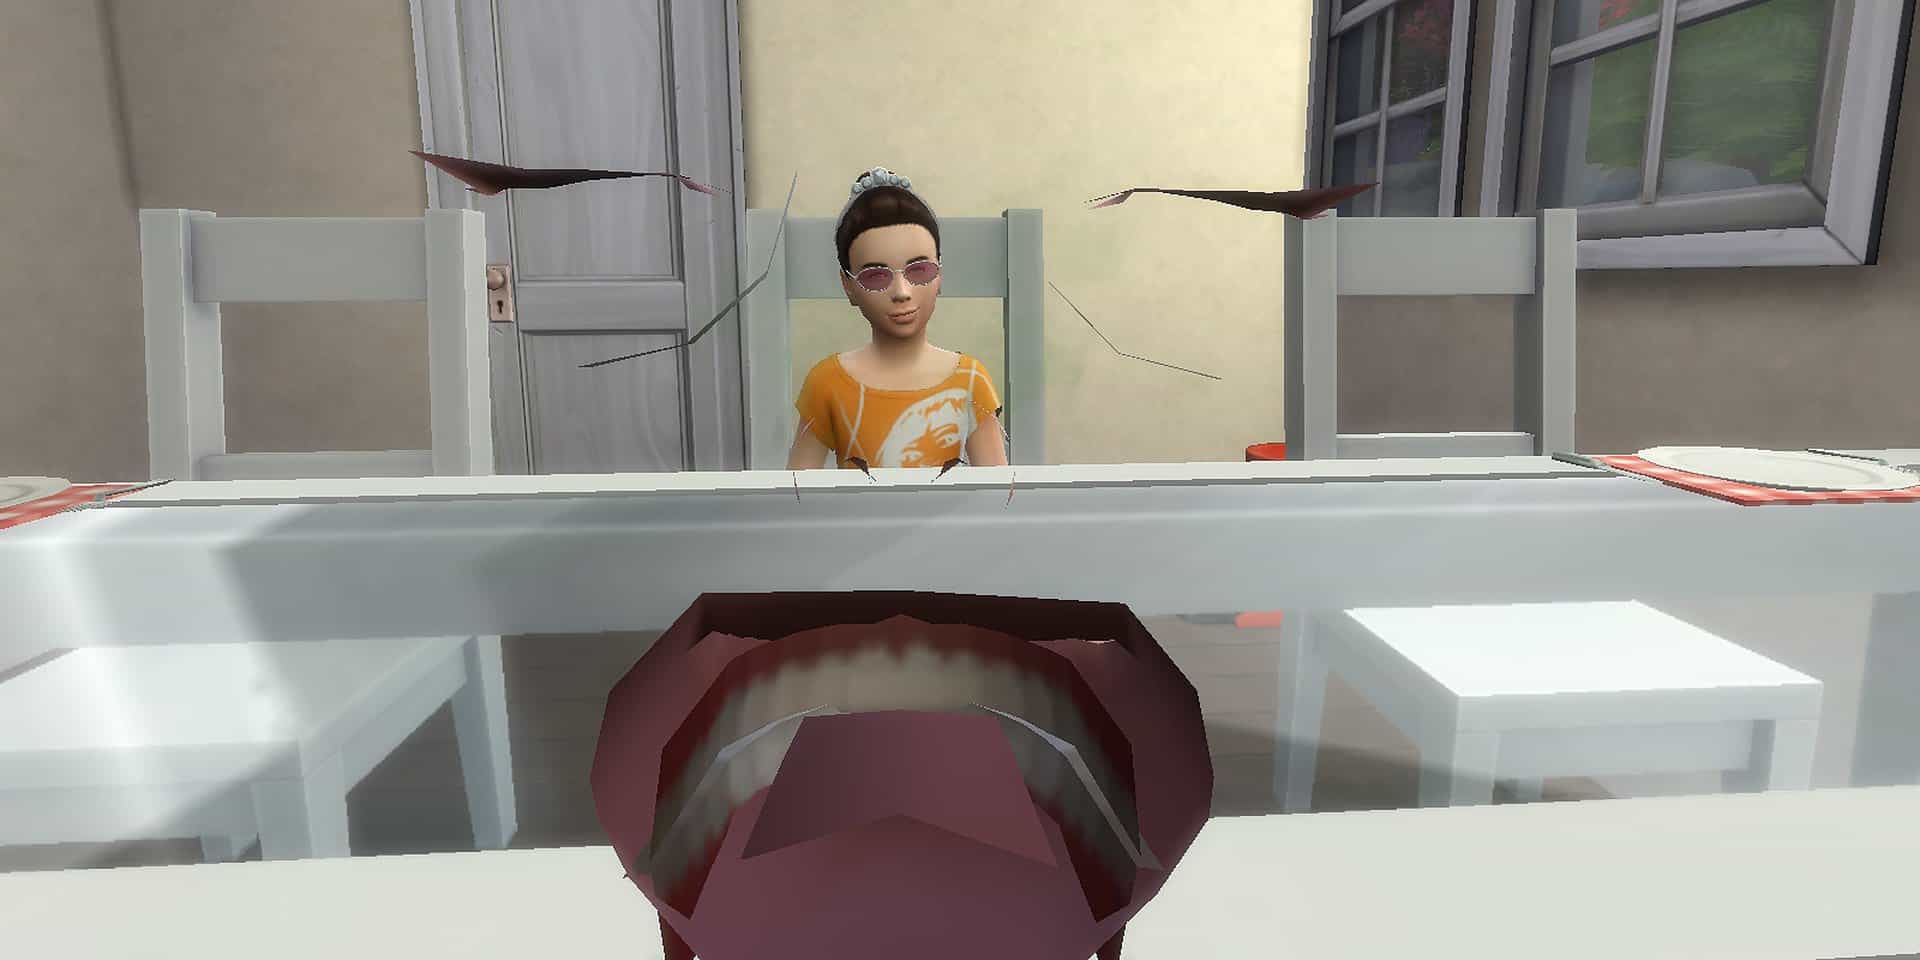 The first-person gameplay causes bugs in The Sims 4.